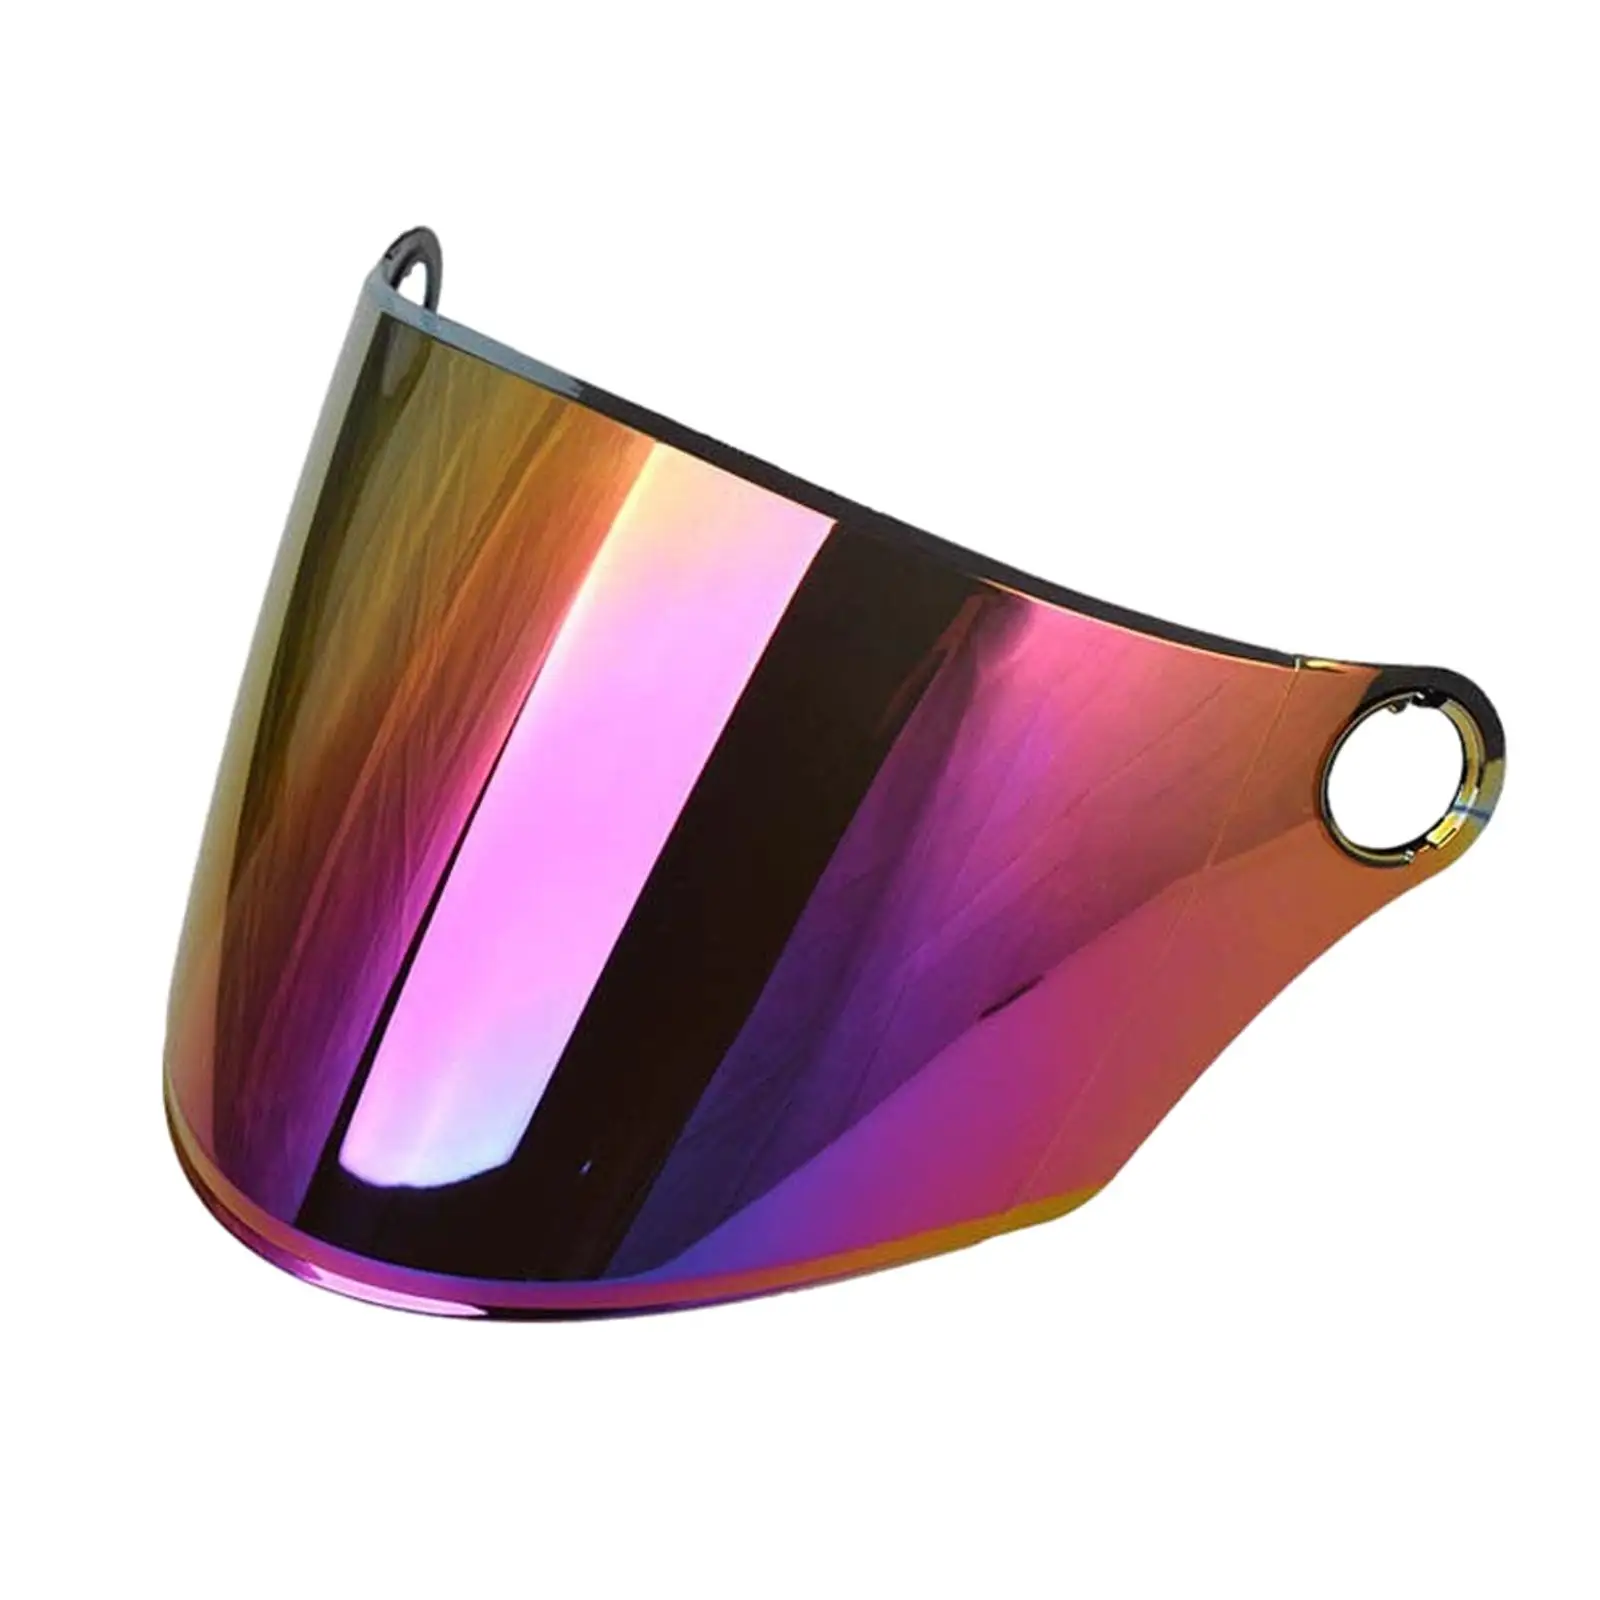 Universal Shield Visor Lens Replace Flip up Down Retro Colorful Windproof Windshield for Motorcycle Helmet Open Face 3 Snap